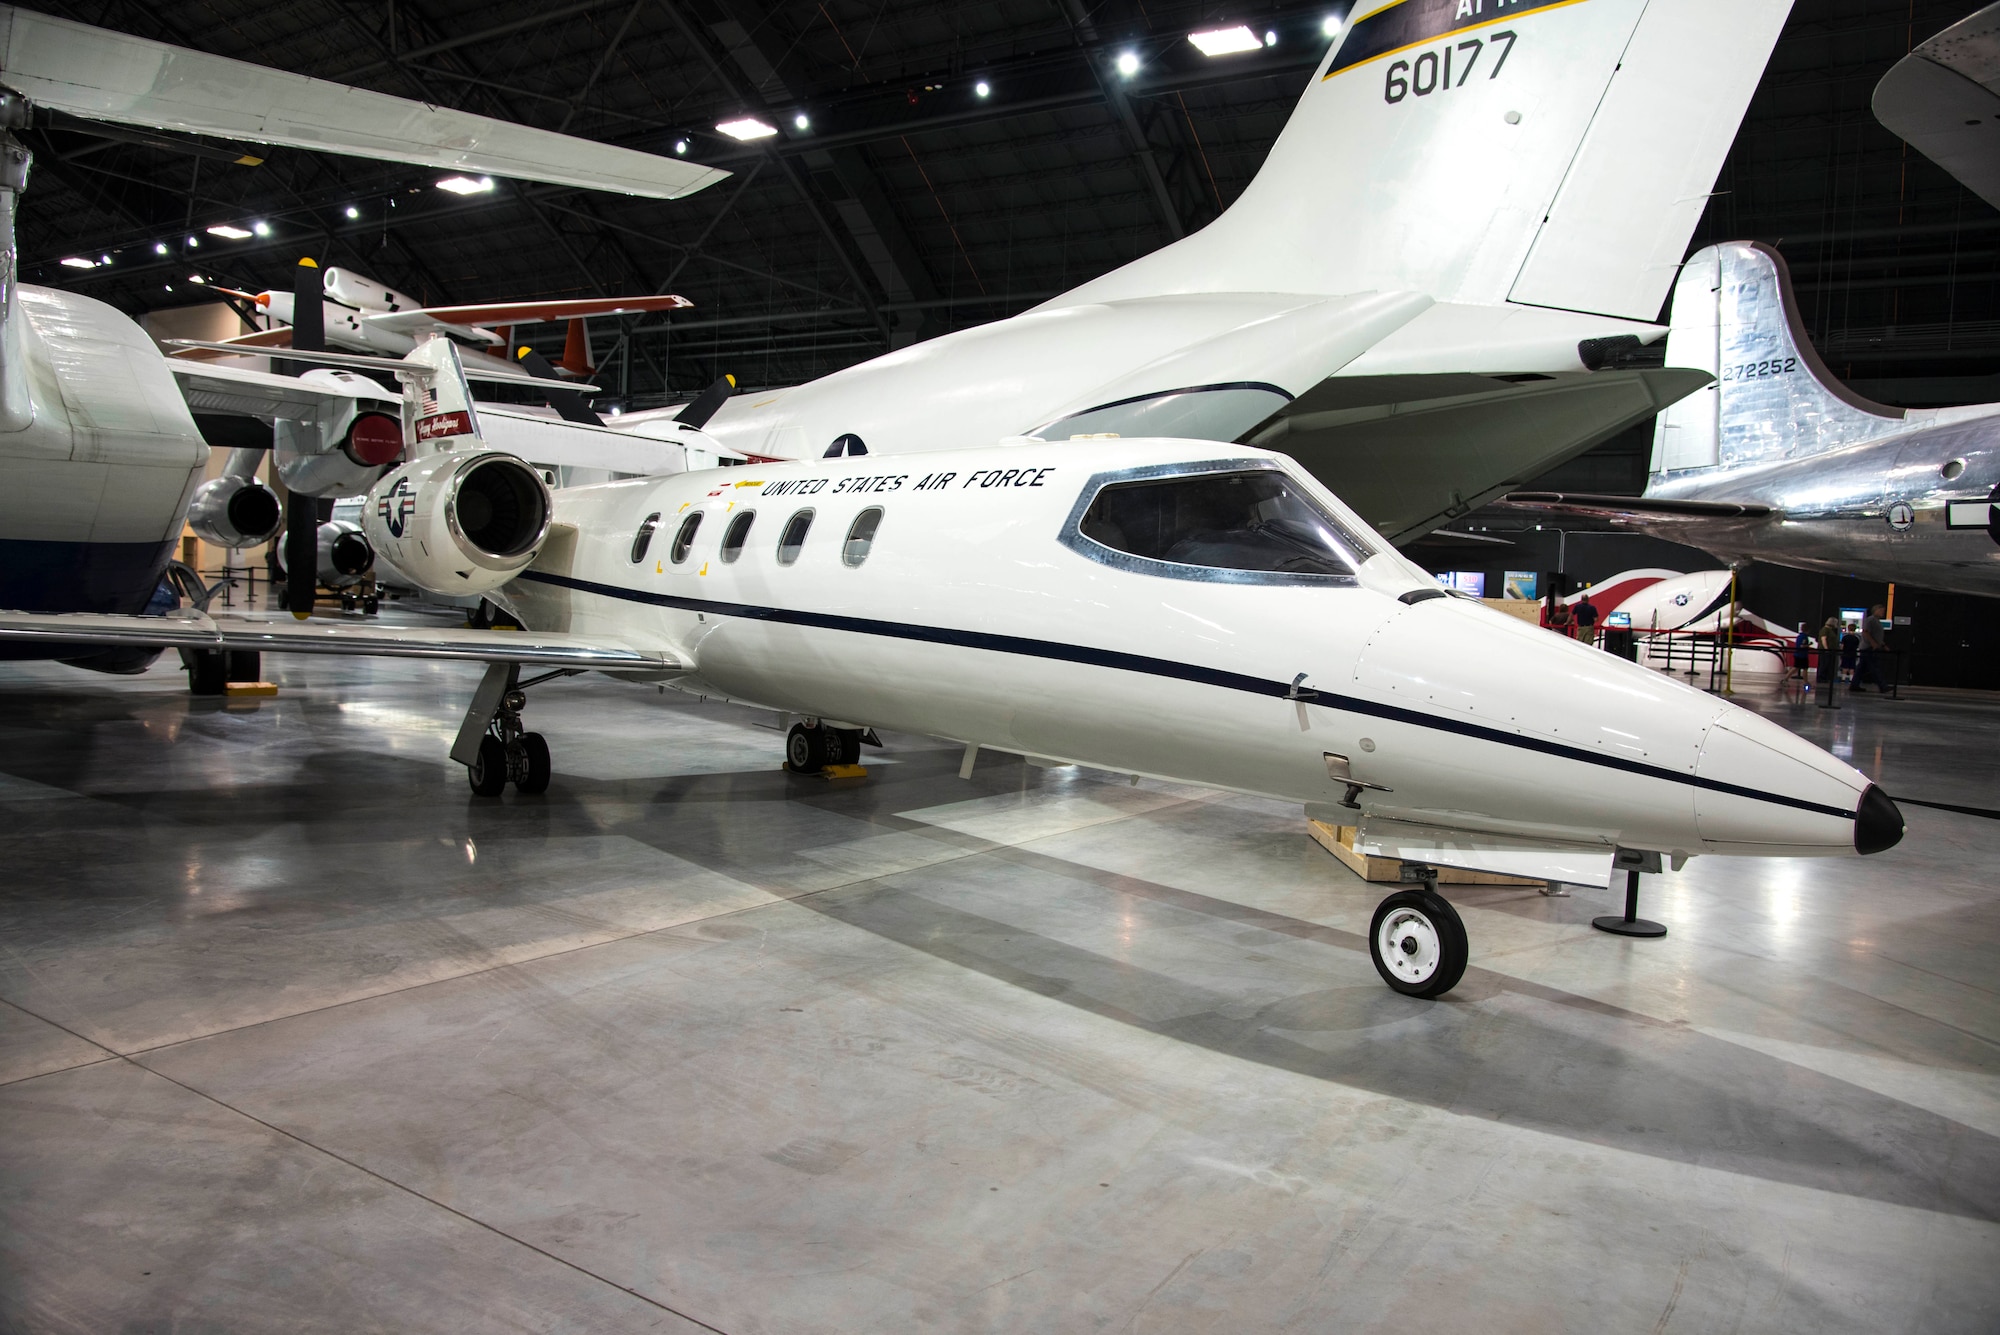 DAYTON, Ohio -- Learjet C-21A aircraft in the Global Reach Gallery at the National Museum of the U.S. Air Force. (U.S. Air Force photo by Ken LaRock)